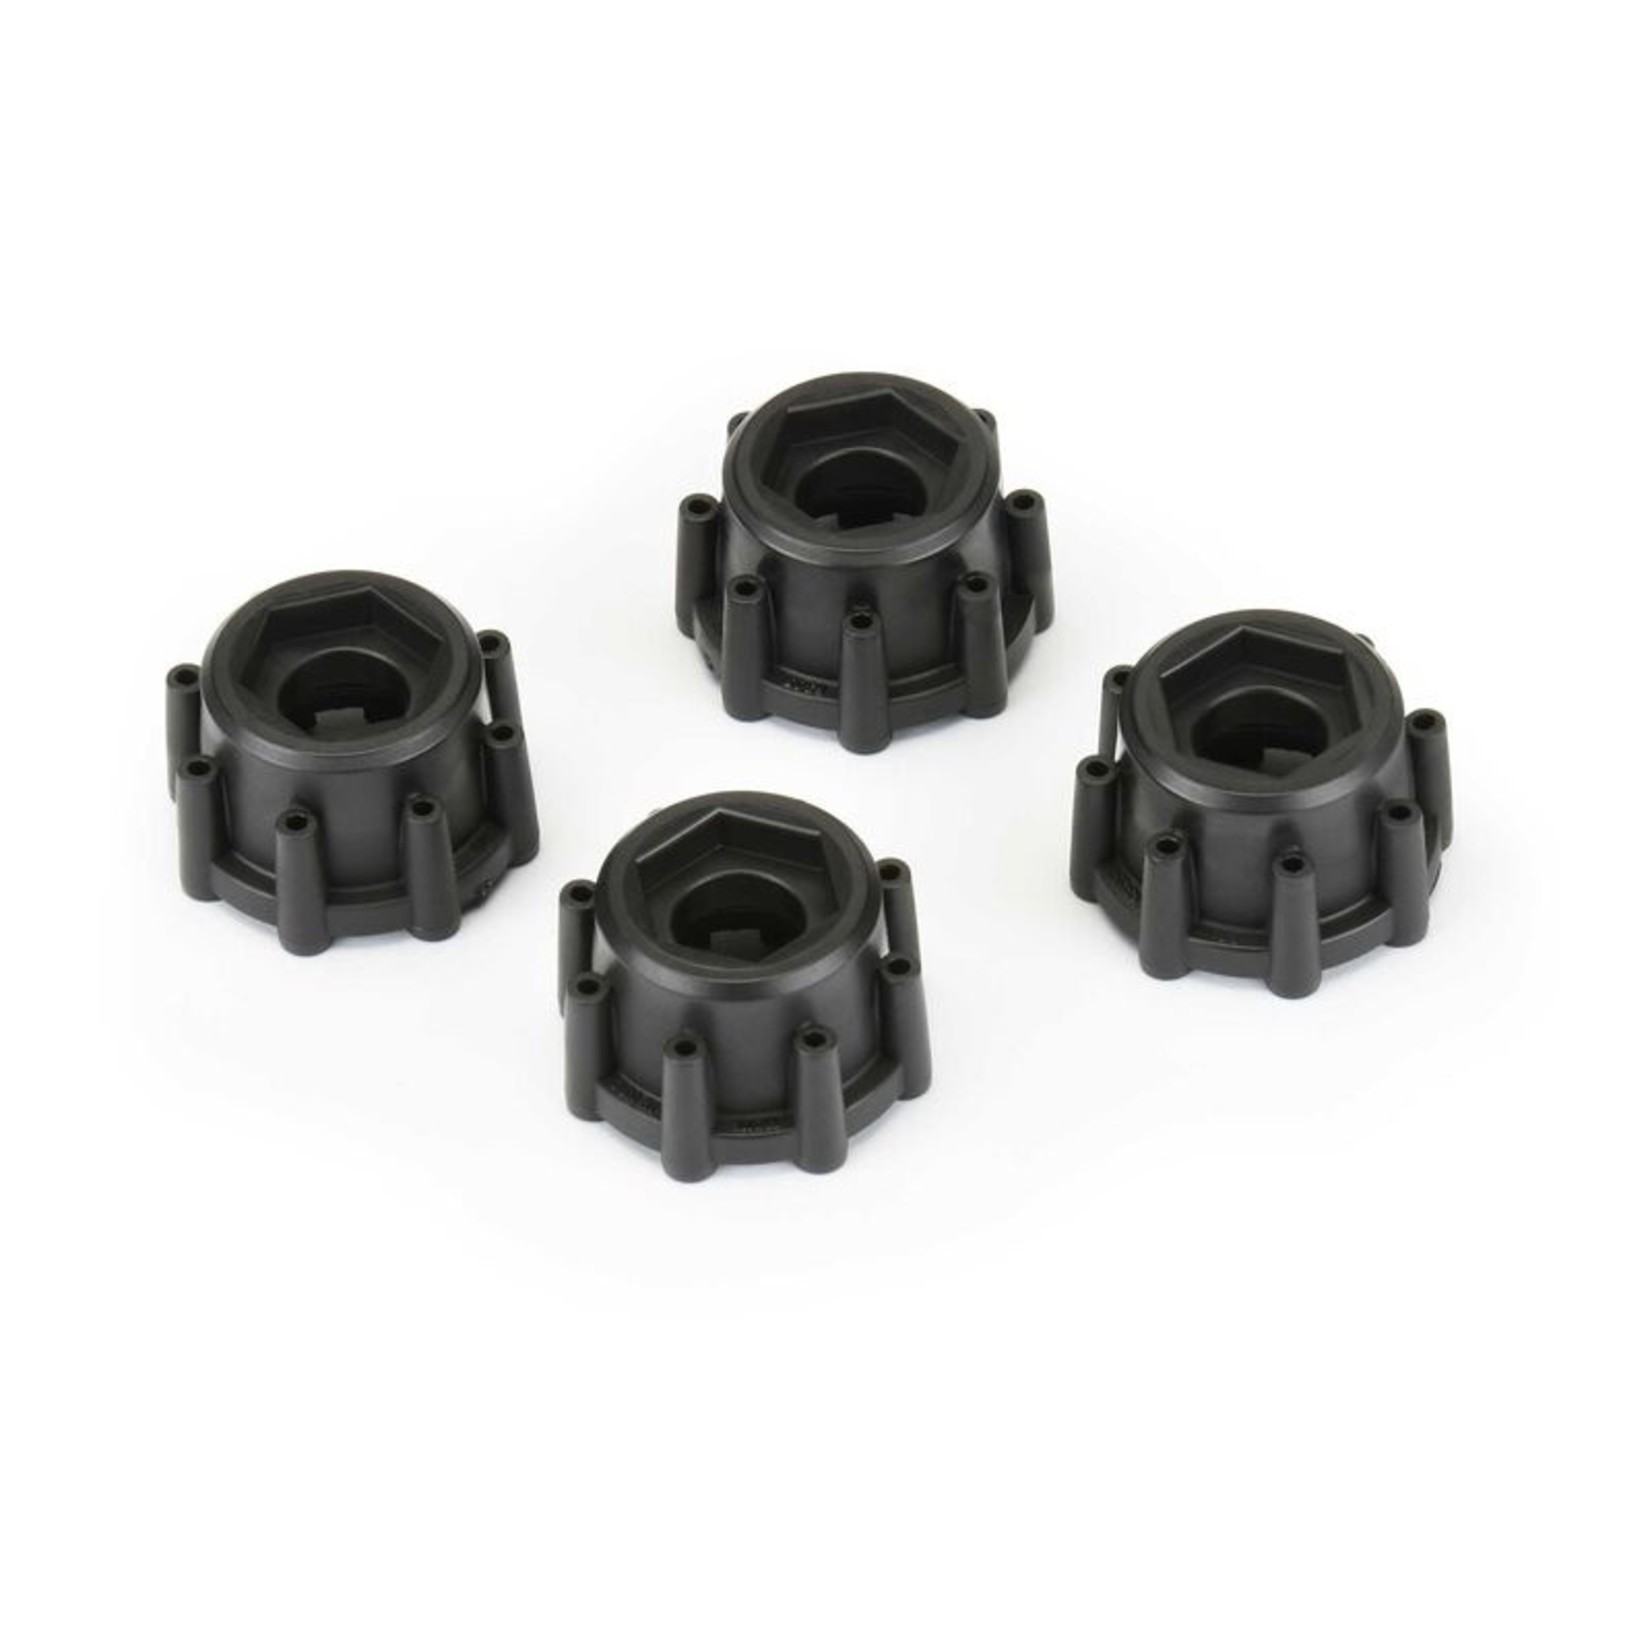 PRO PRO634500  8x32 to 17mm Hex Adapters for 8x32 3.8" Wheels